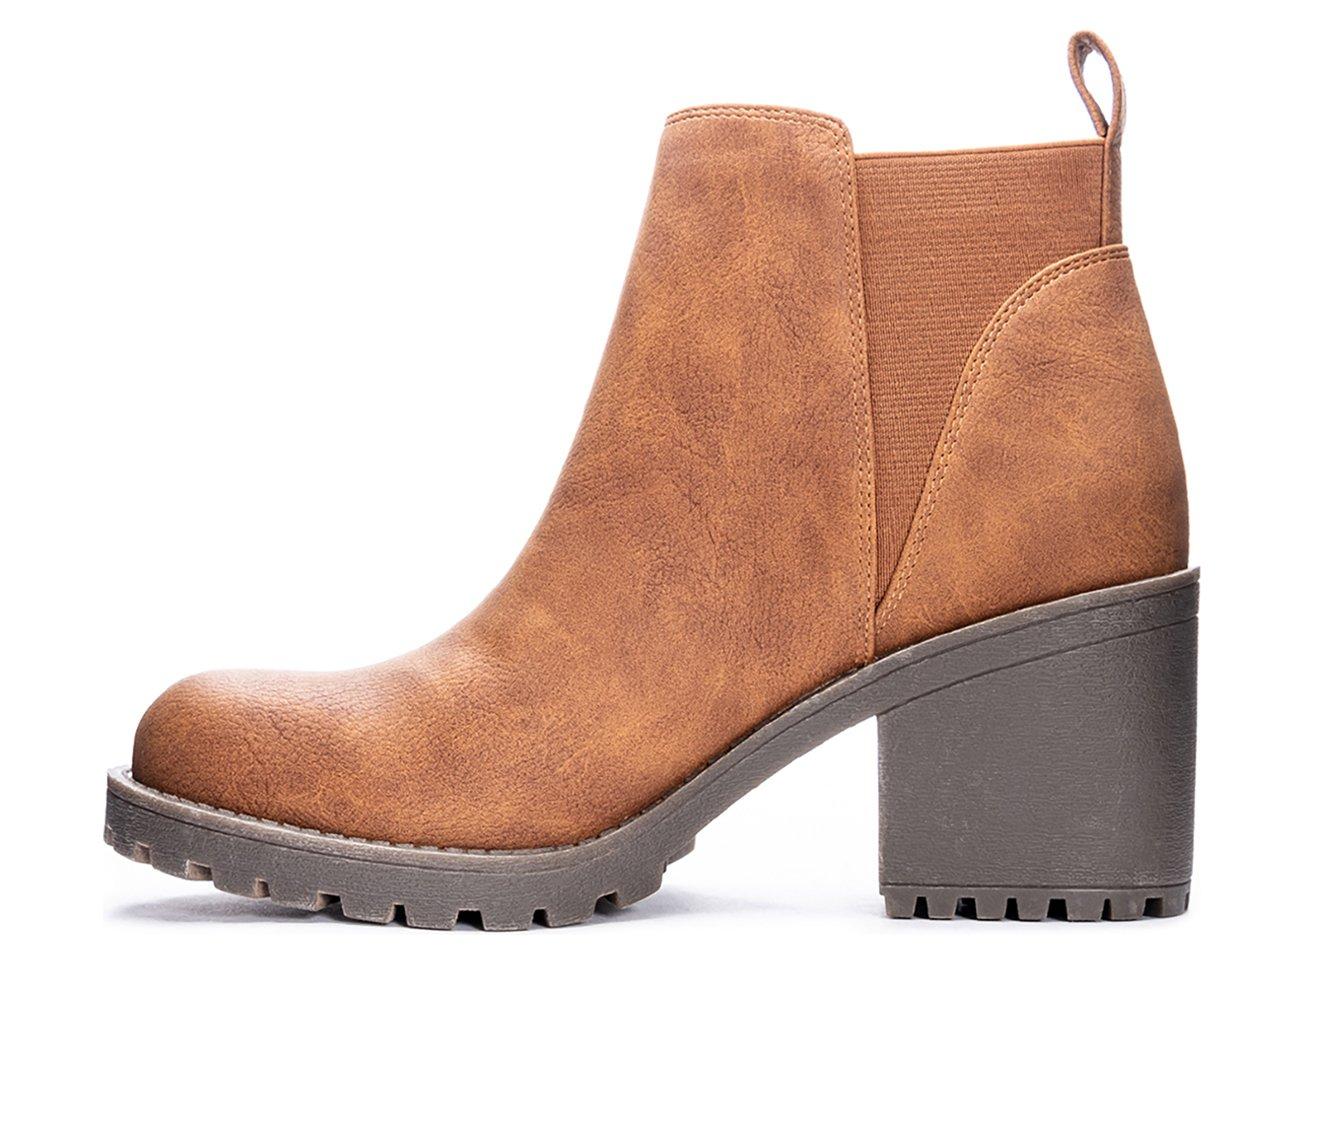 Women's Dirty Laundry Lido Lugged Chelsea Boots